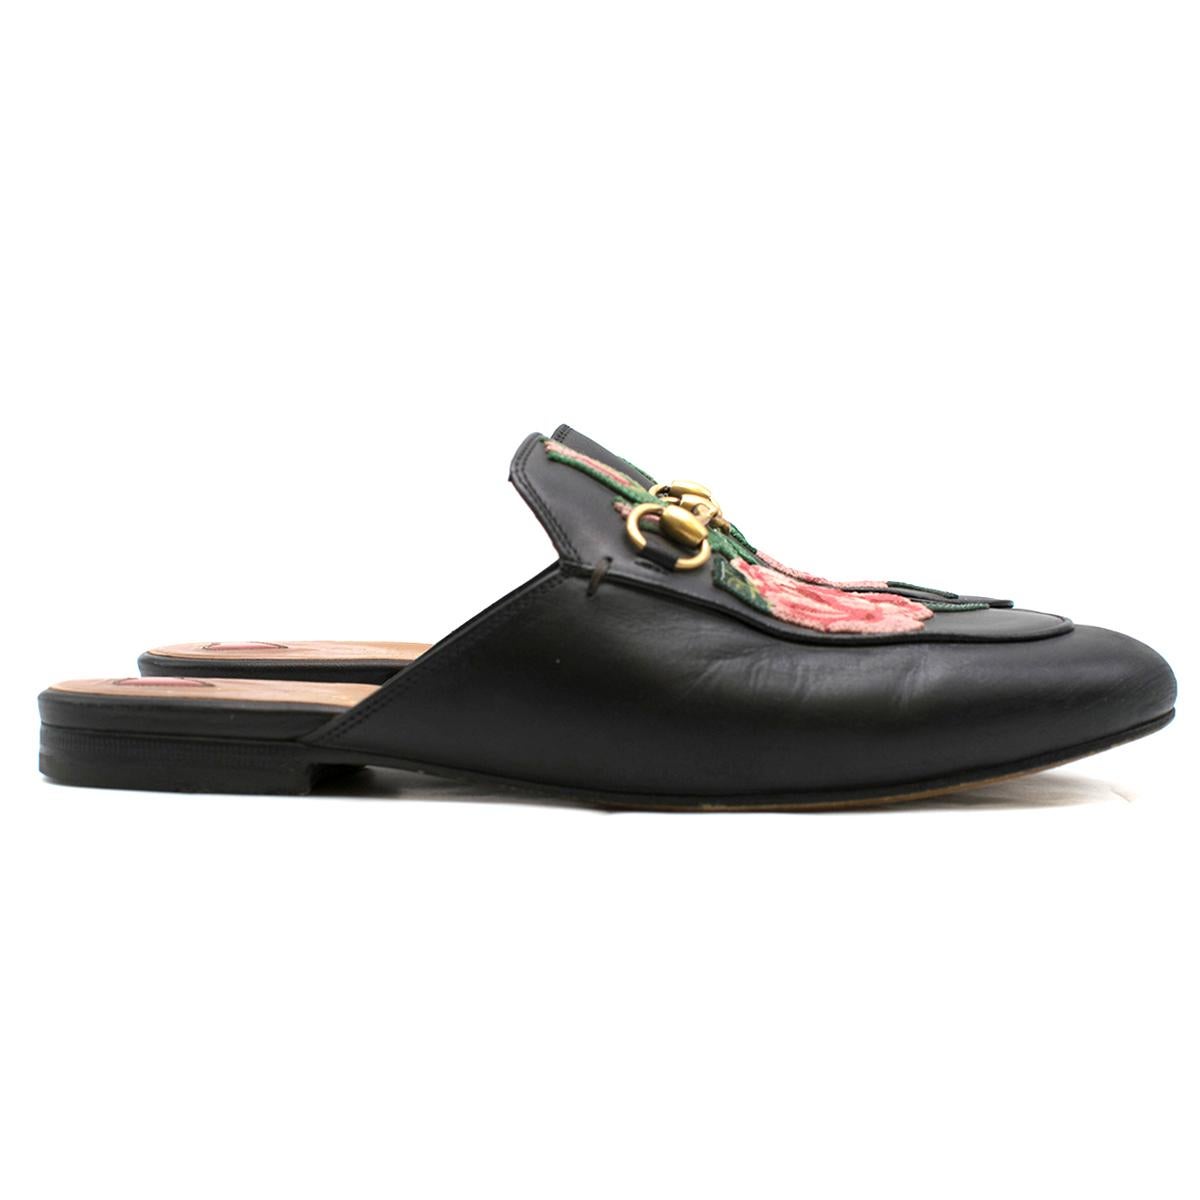 Gucci Black Rose Embroidered Princetown Slippers

- Black leather slippers
- Thread embroidered roses 
- Horsebit detail
- Elongated toe
- Leather sole

Please note, these items are pre-owned and may show some signs of storage, even when unworn and